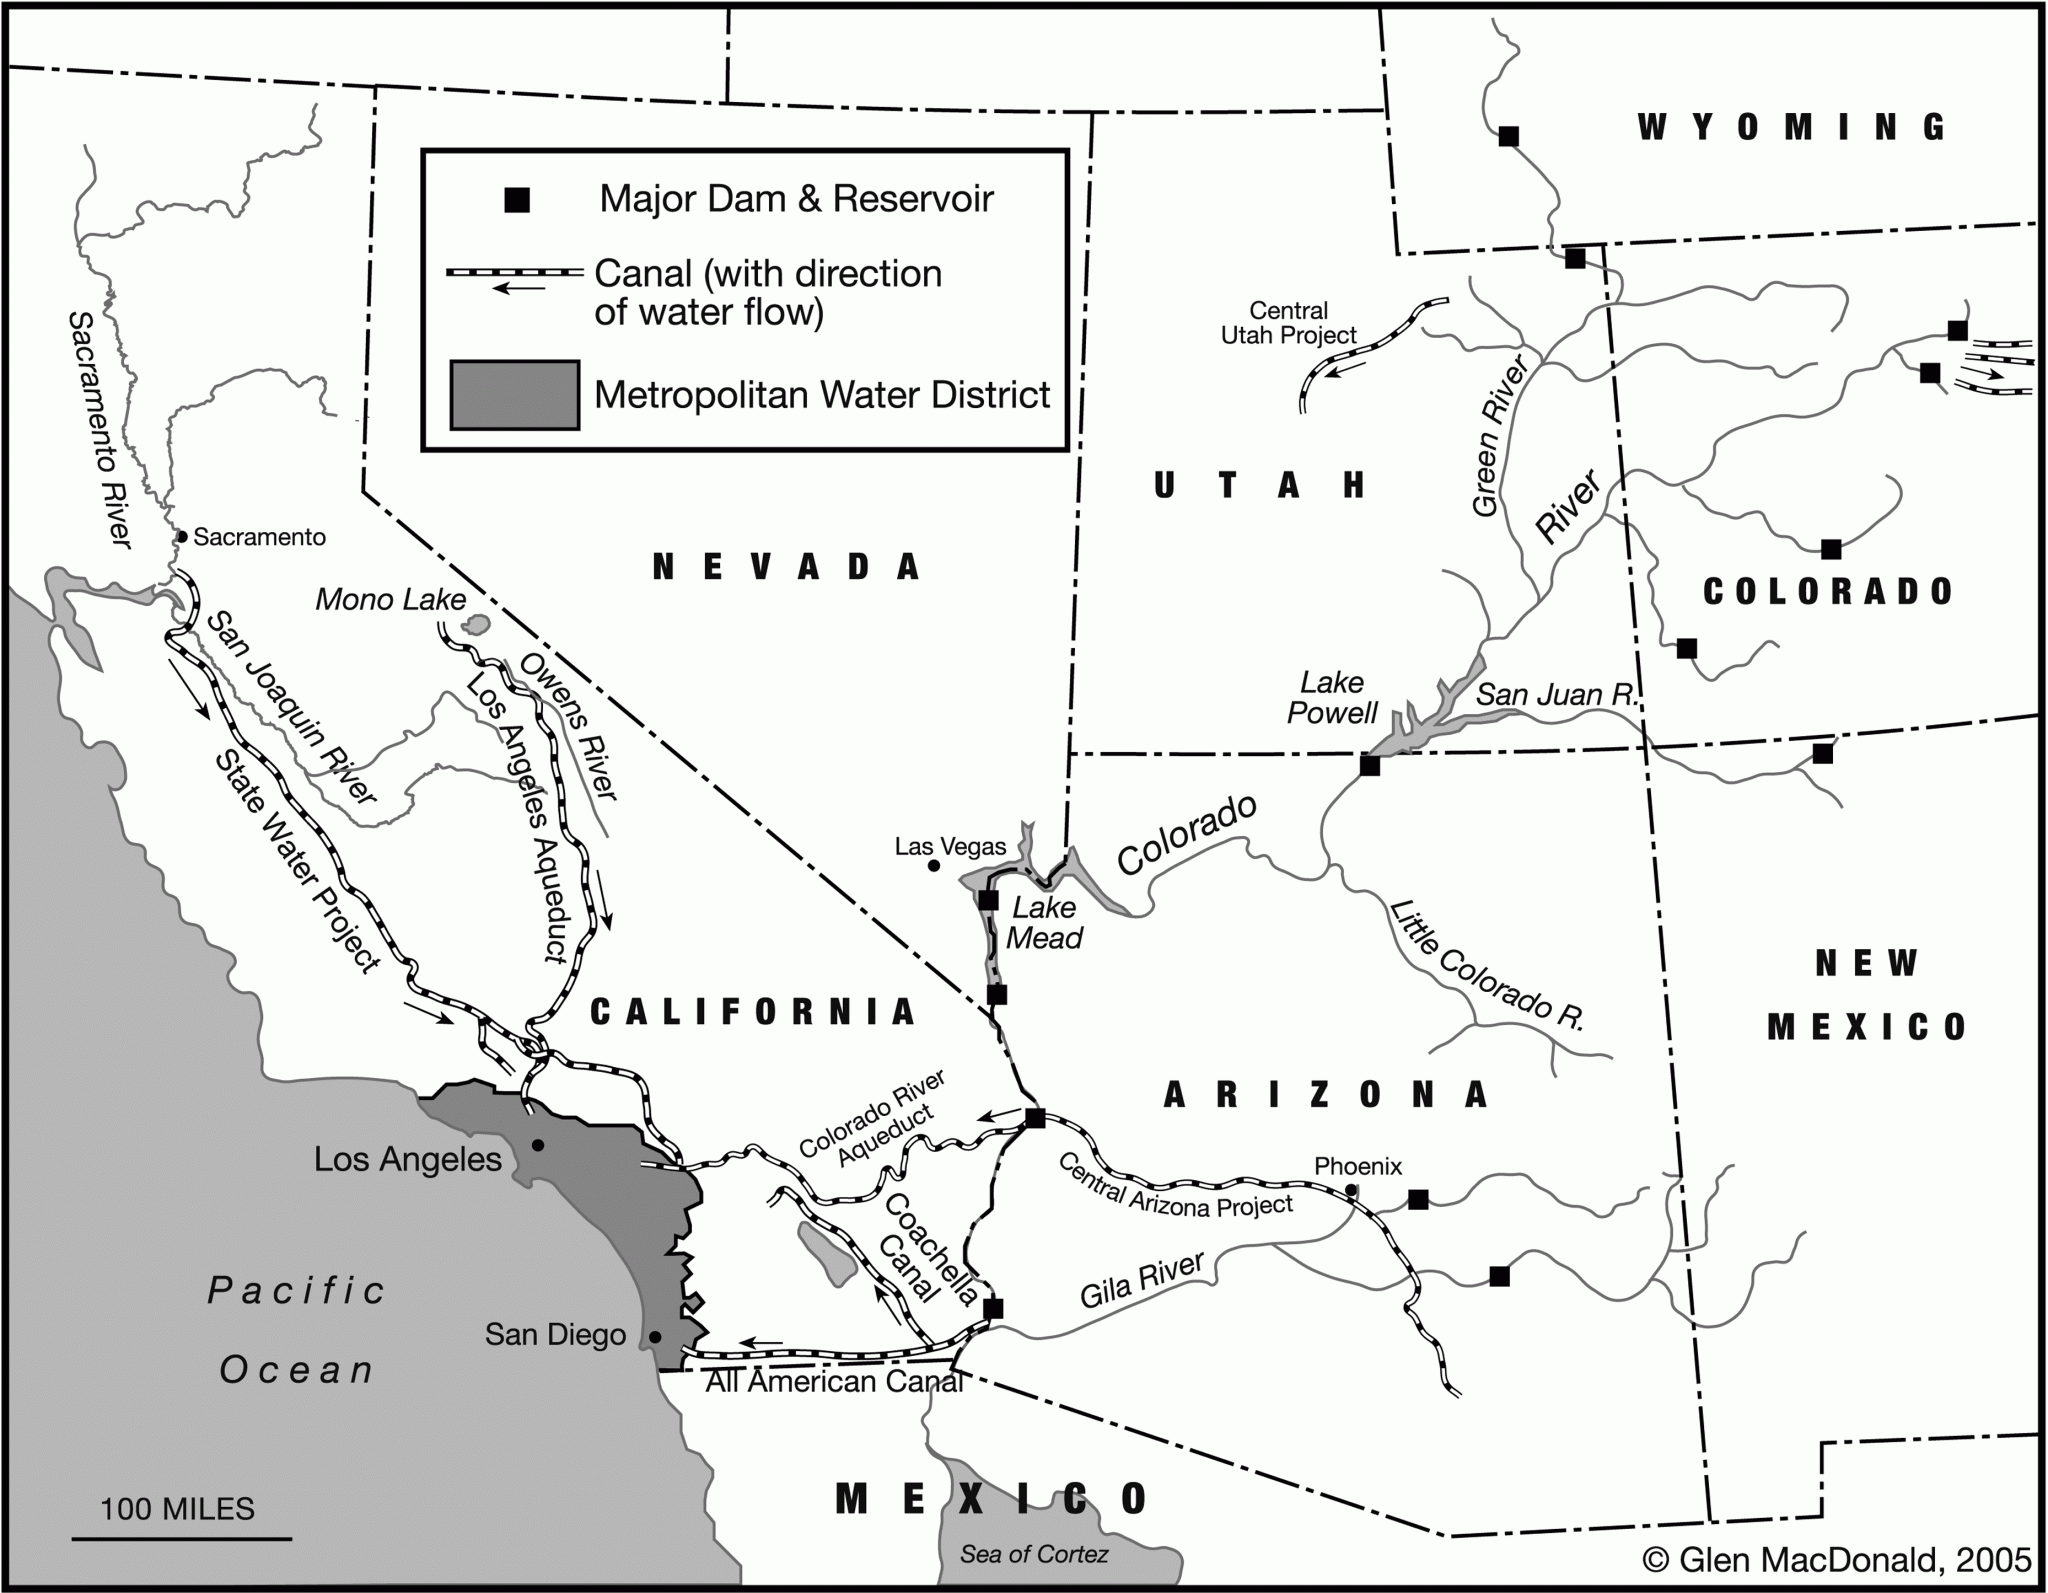 Map Depicting Water Infrastructure of Southwest US